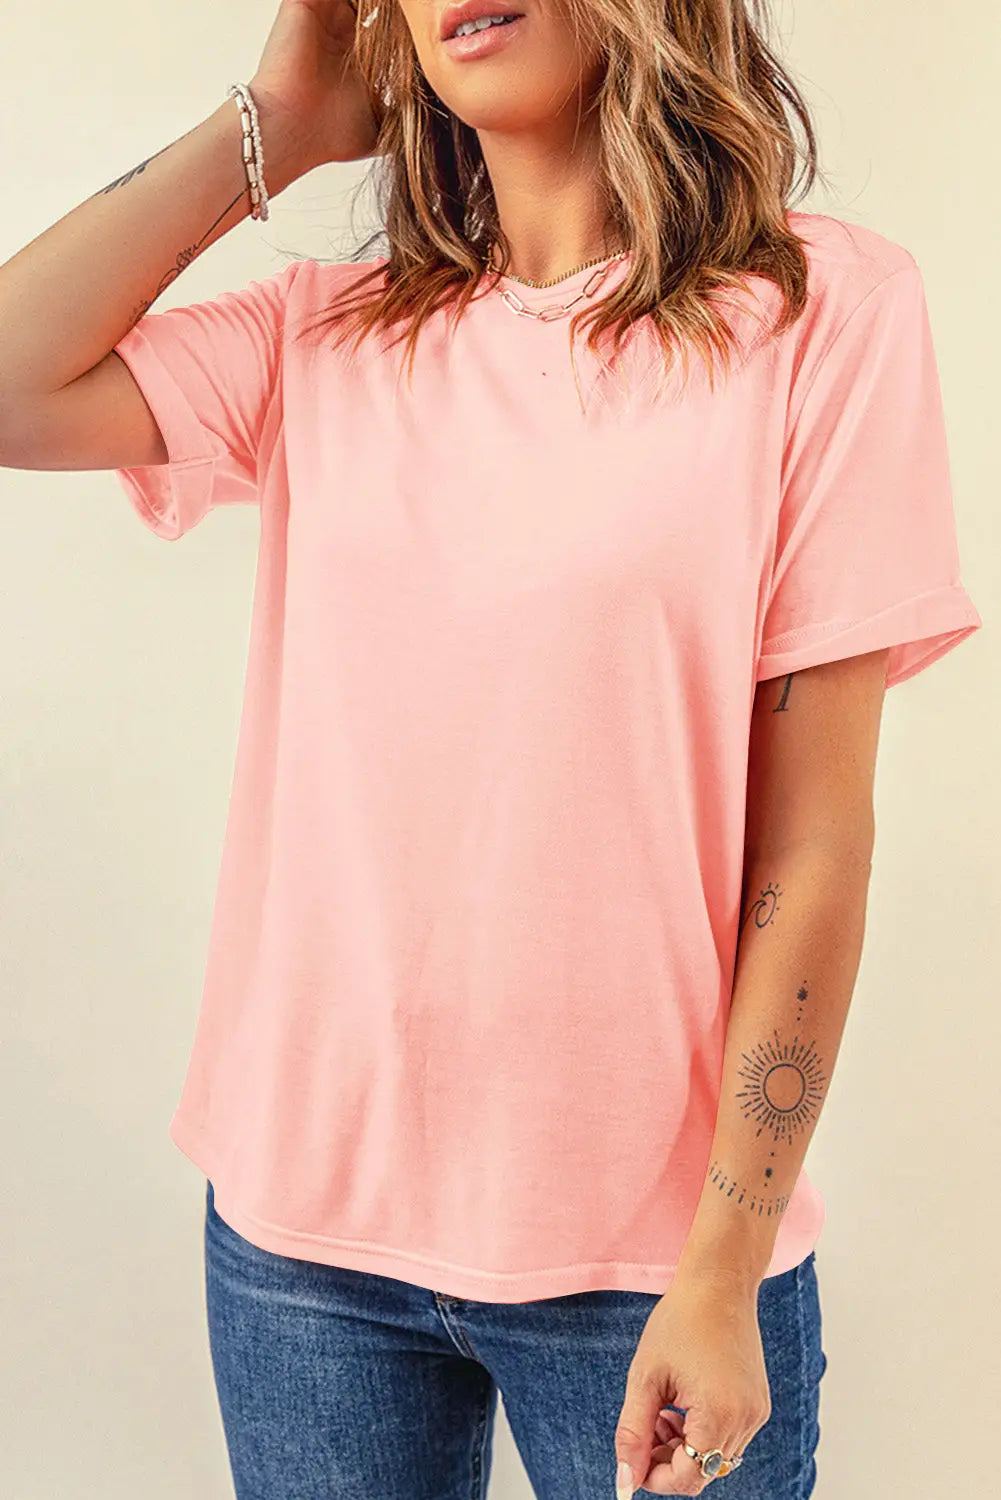 Red casual plain crew neck tee - pink / 2xl / 62% polyester + 32% cotton + 6% elastane - t-shirts